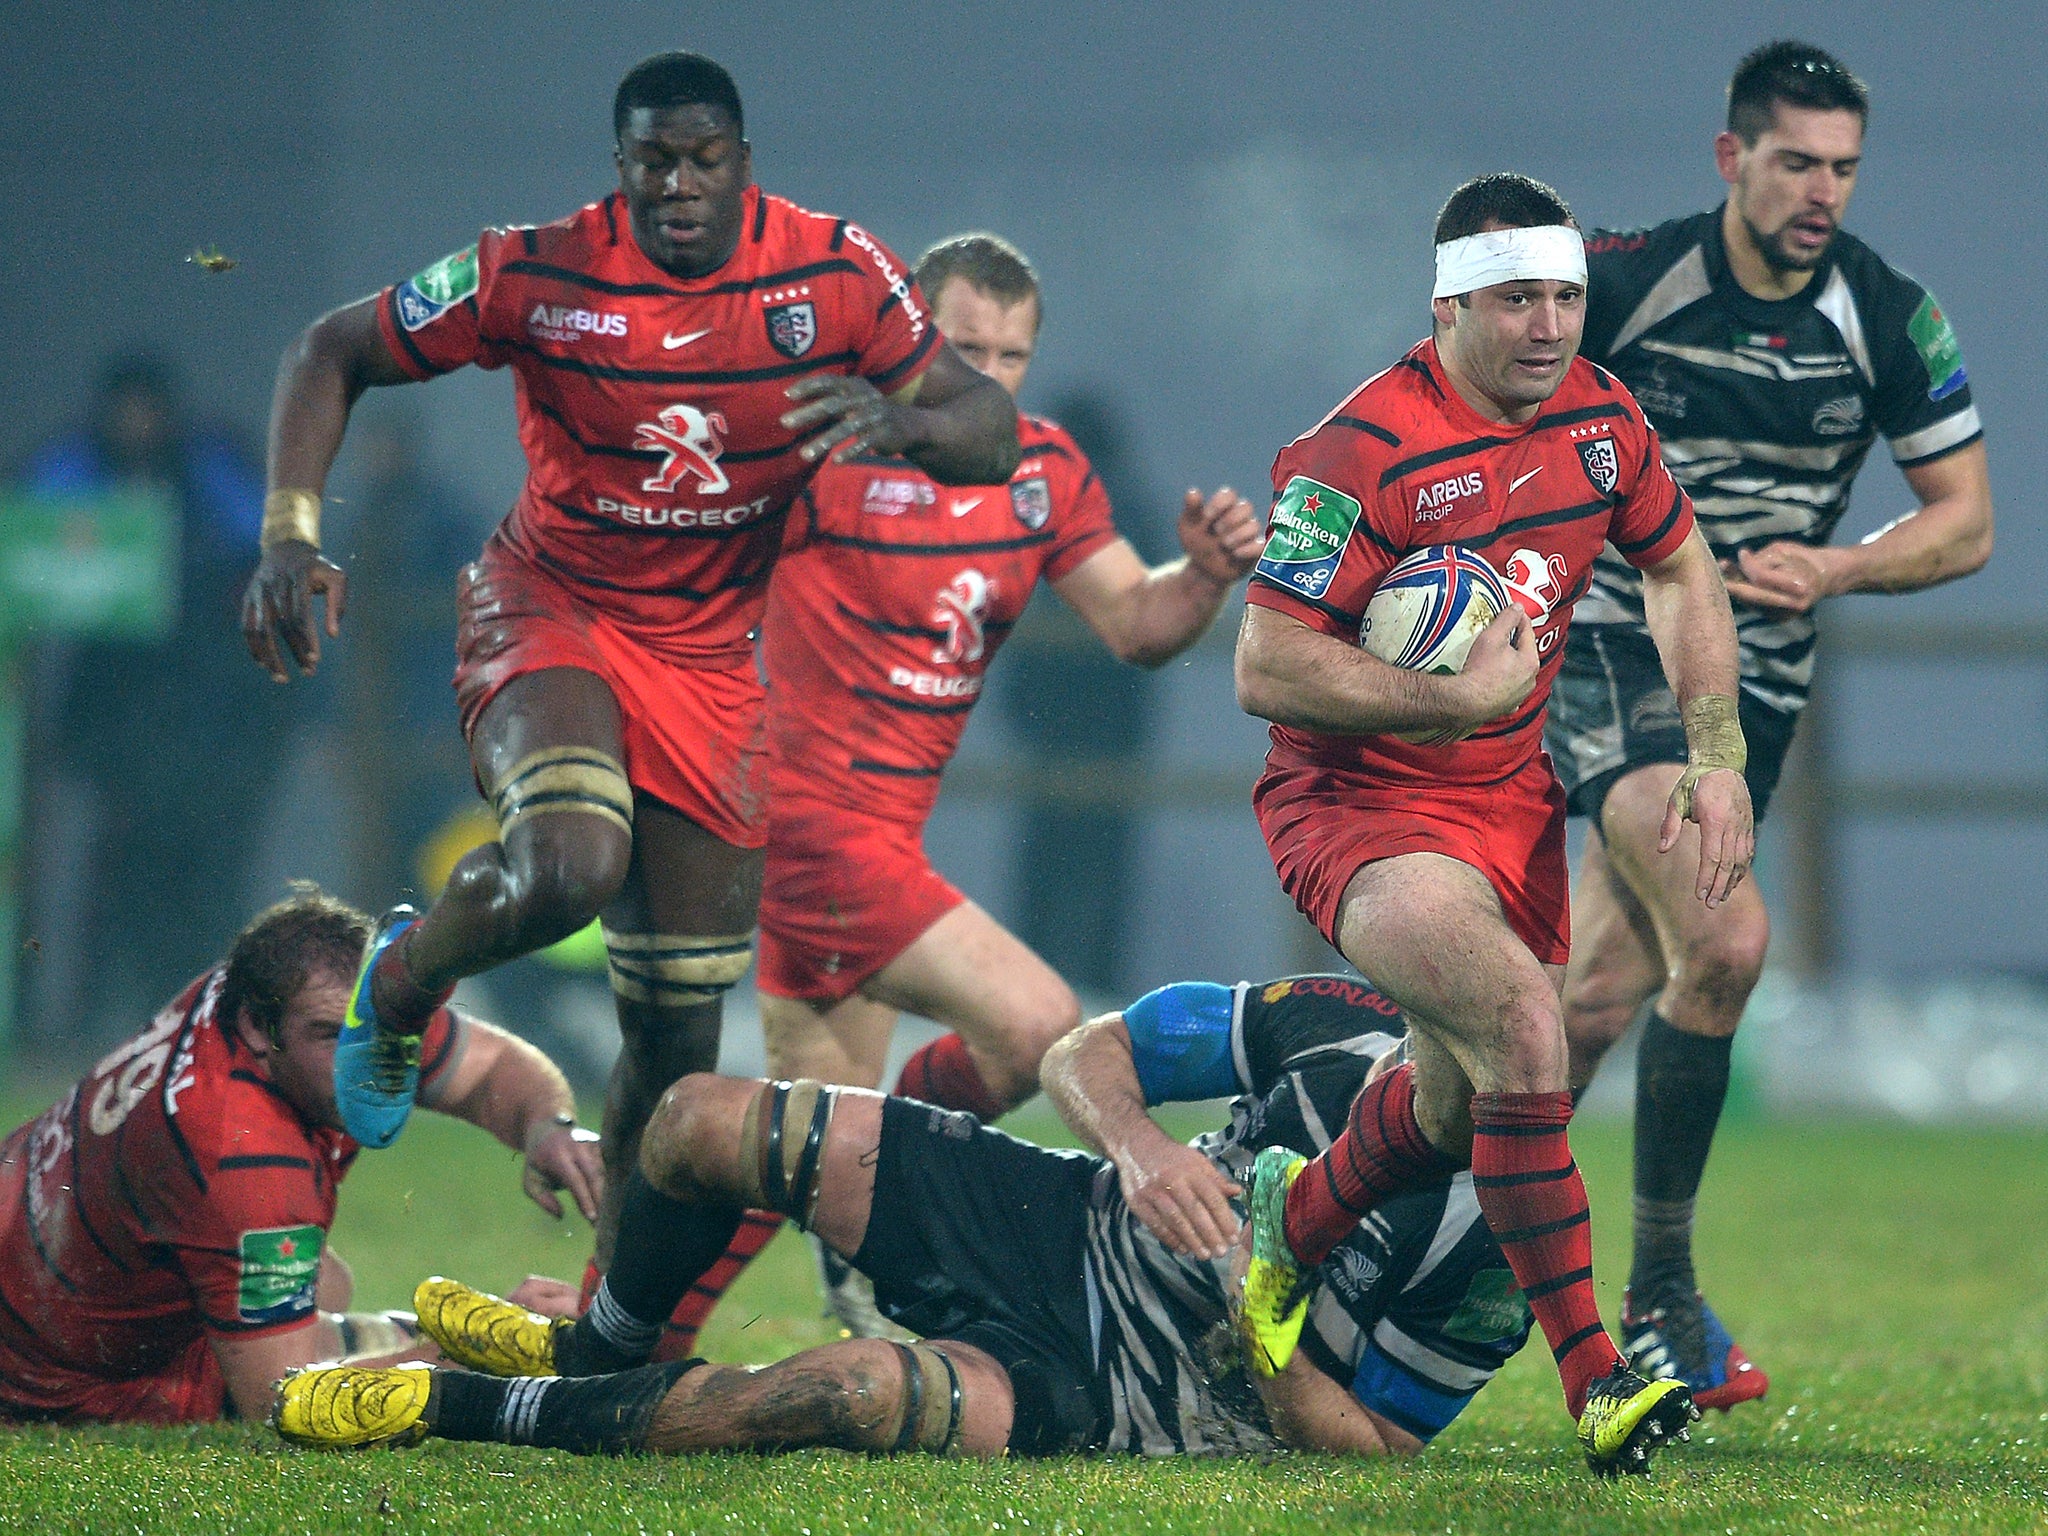 Toulouse beat Zebre 16-6 to move into the Heineken Cup quarter-finals